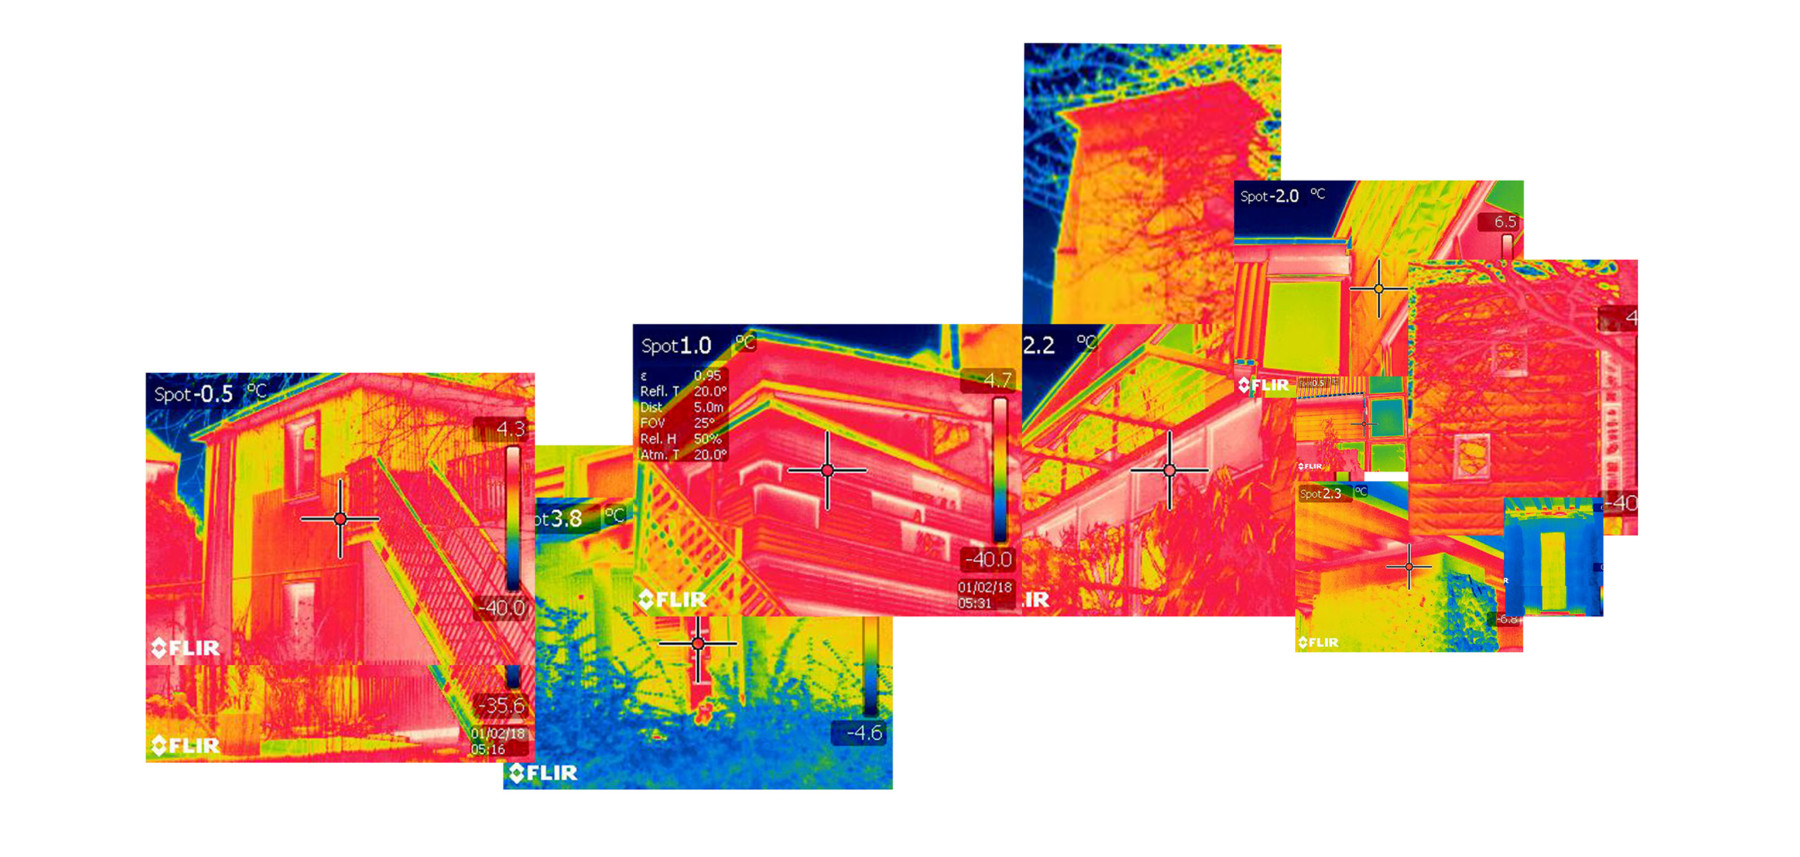 Sarah-Wigglesworth-Architects Stock-Orchard-Street R20 thermal image collage 1800x1200